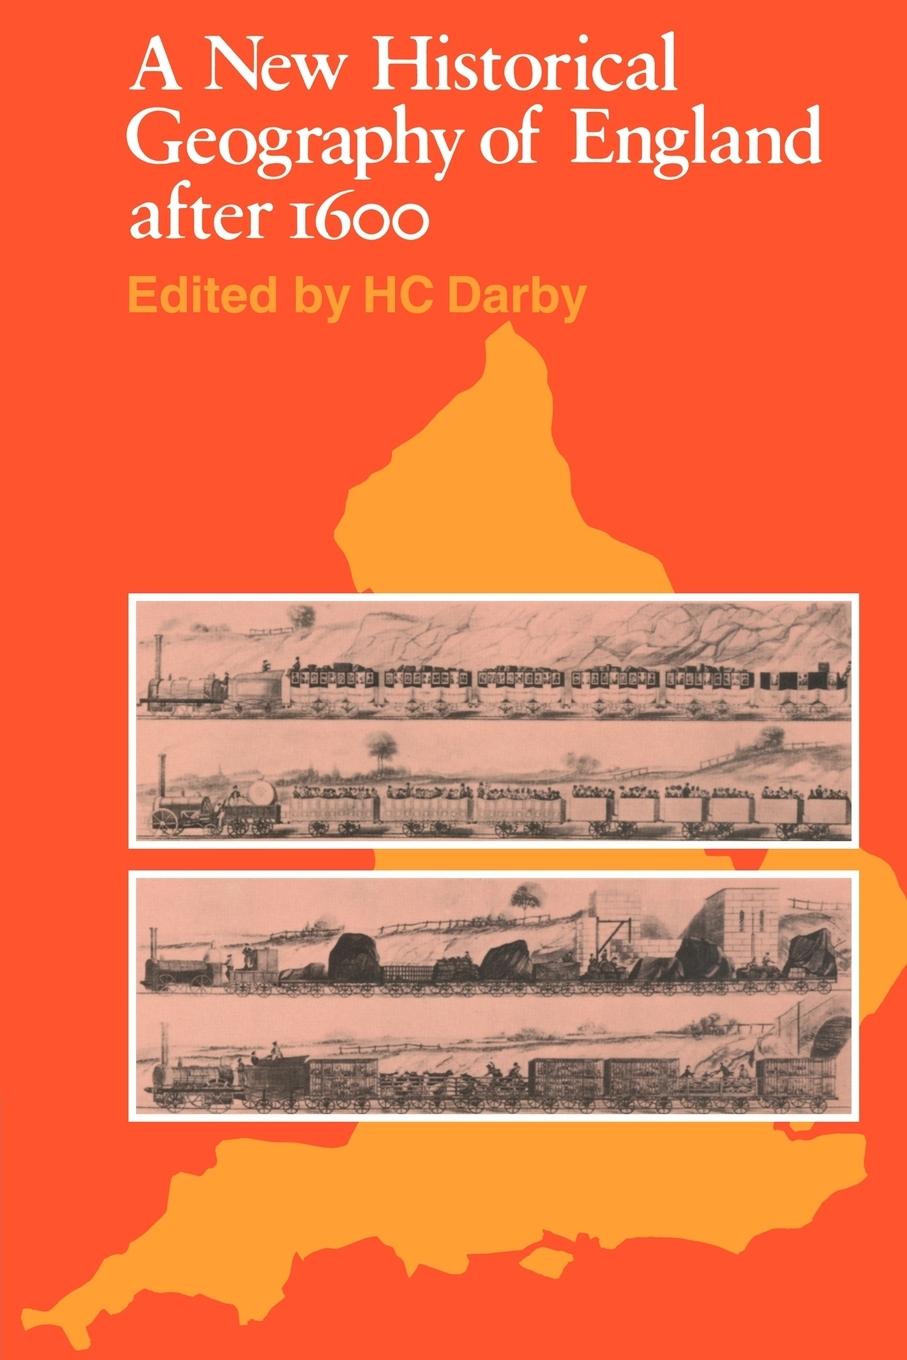 A New Historical Geography of England Ater 1600 - Darby, H. C. Darby